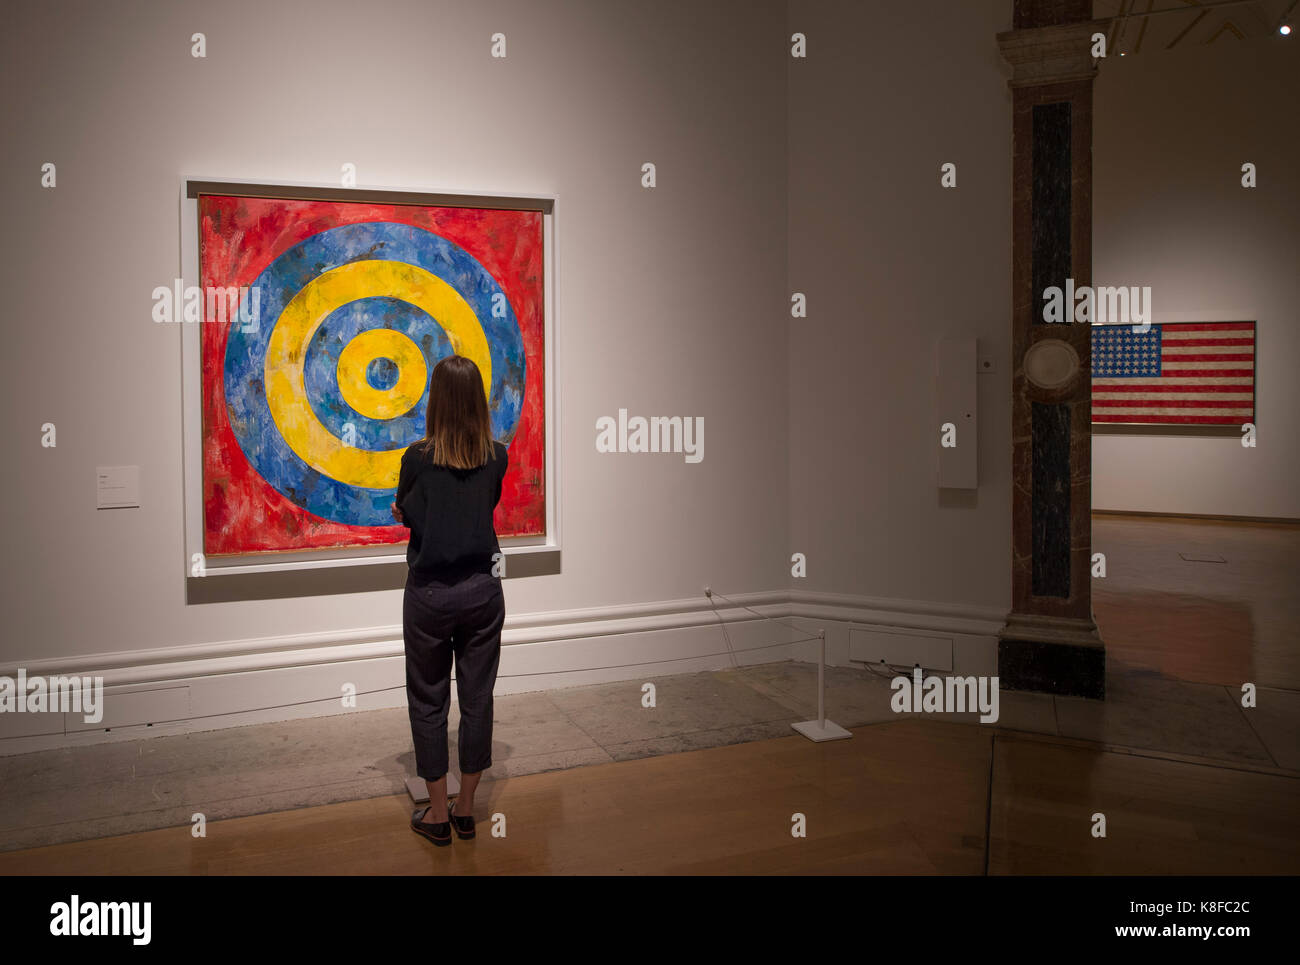 Royal Academy of Arts, London, UK. 19 September 2017. The RA presents a landmark exhibition of the Honorary Royal Academician, Jasper Johns, the first comprehensive survey of the artist's work to be held in the UK for 40 years. The exhibition runs from 23 September - 10 December 2017. Photograph (left to right): Target, 1961. The Art Institute of Chicago; Flag, 1958. Private collection.  Viewed by a member of gallery staff. Credit: Malcolm Park/Alamy Live News. Stock Photo